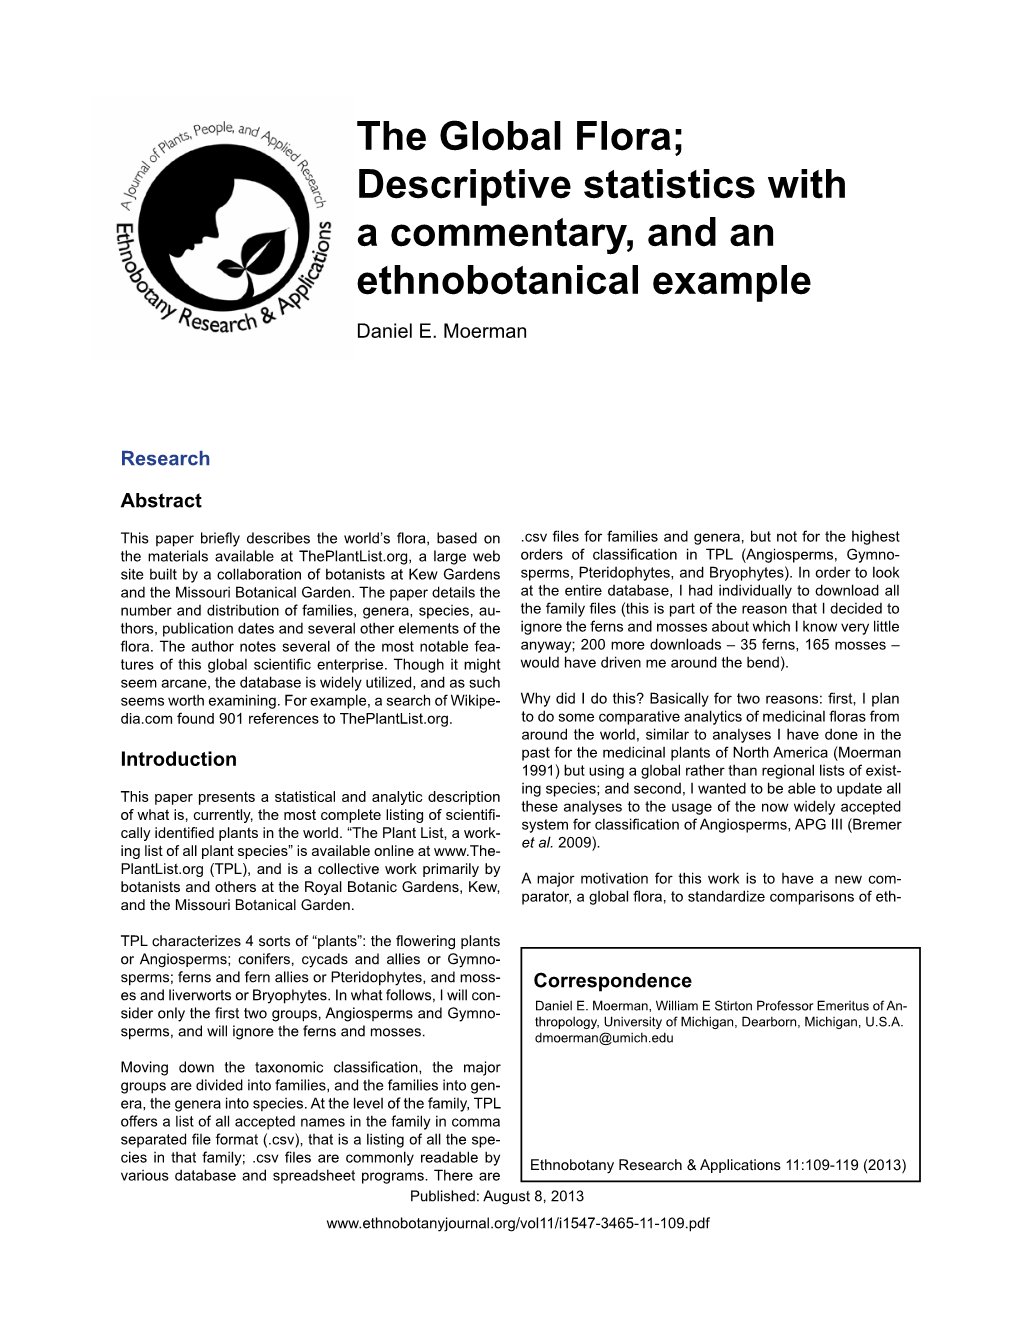 The Global Flora; Descriptive Statistics with a Commentary, and an Ethnobotanical Example Daniel E